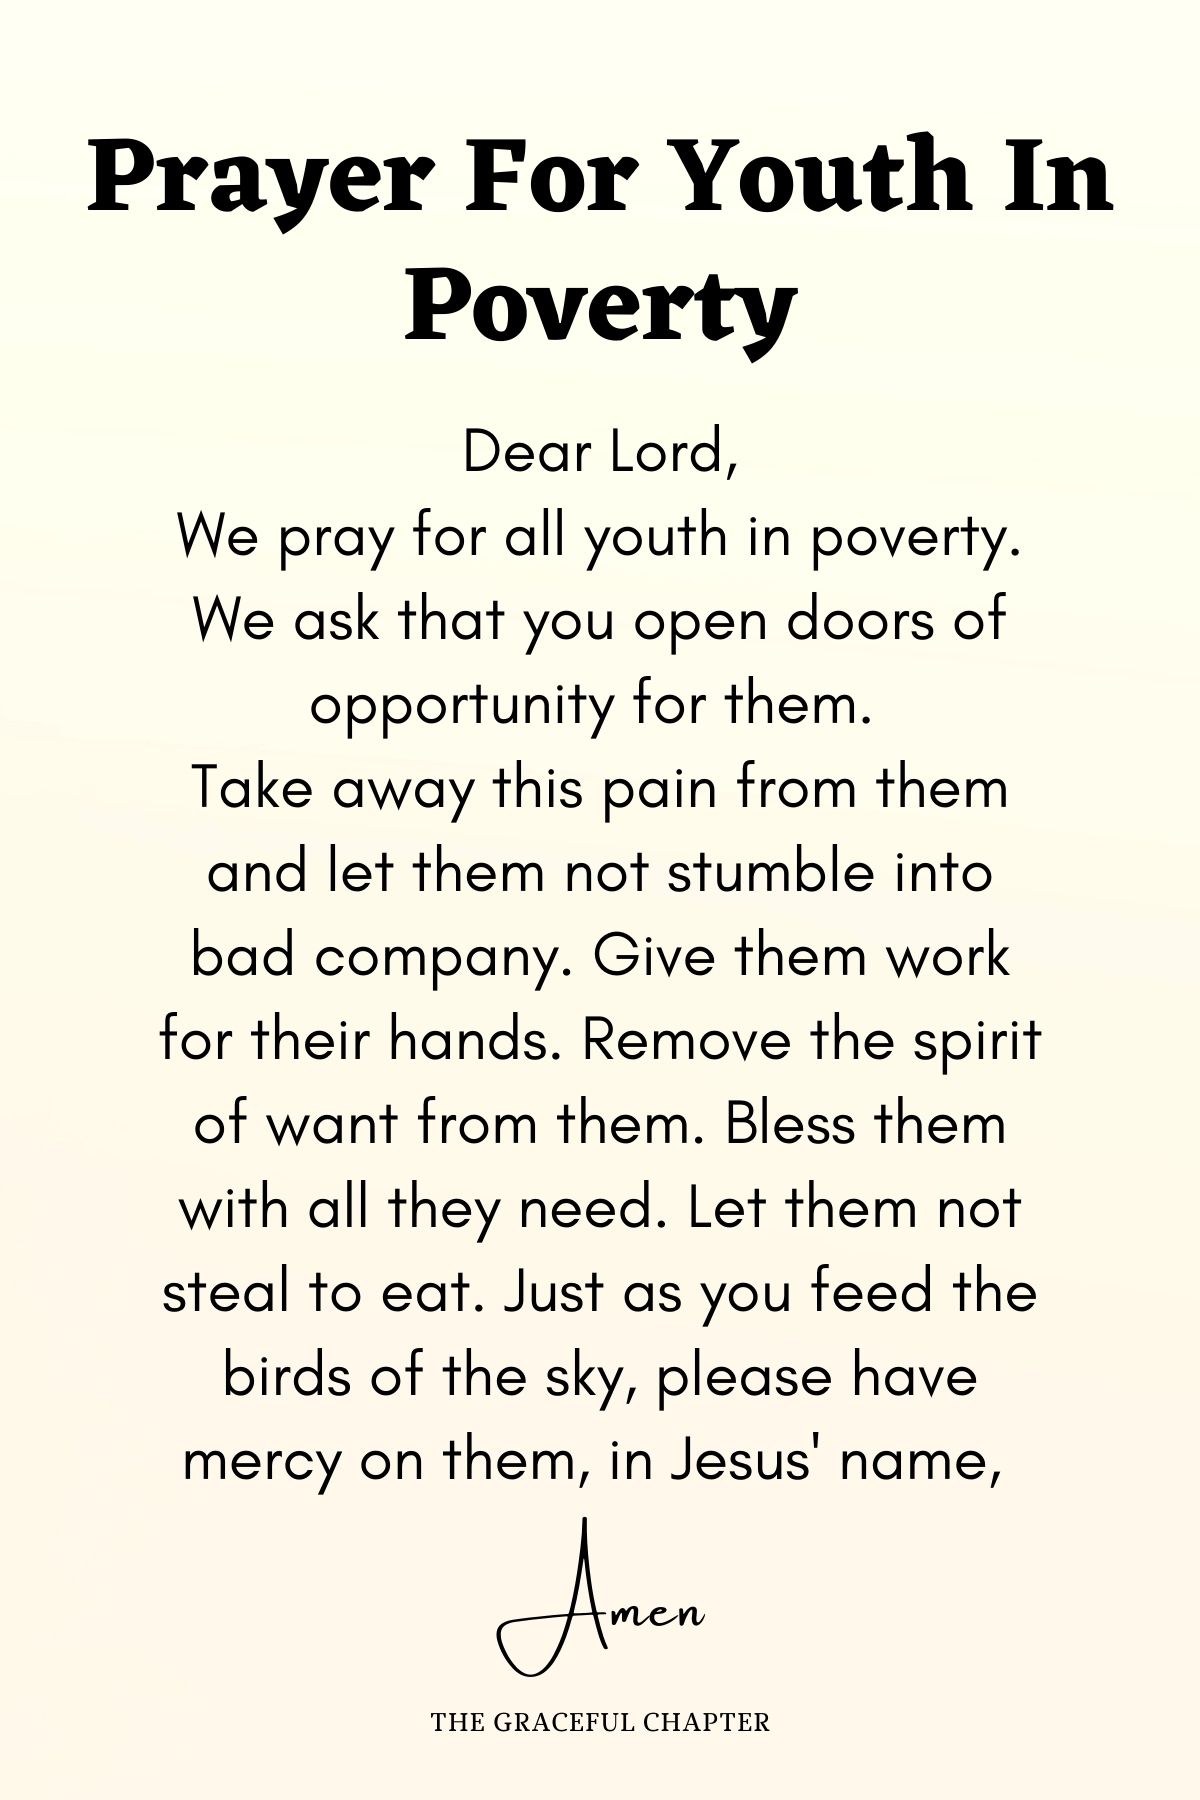 Prayer for youth in poverty